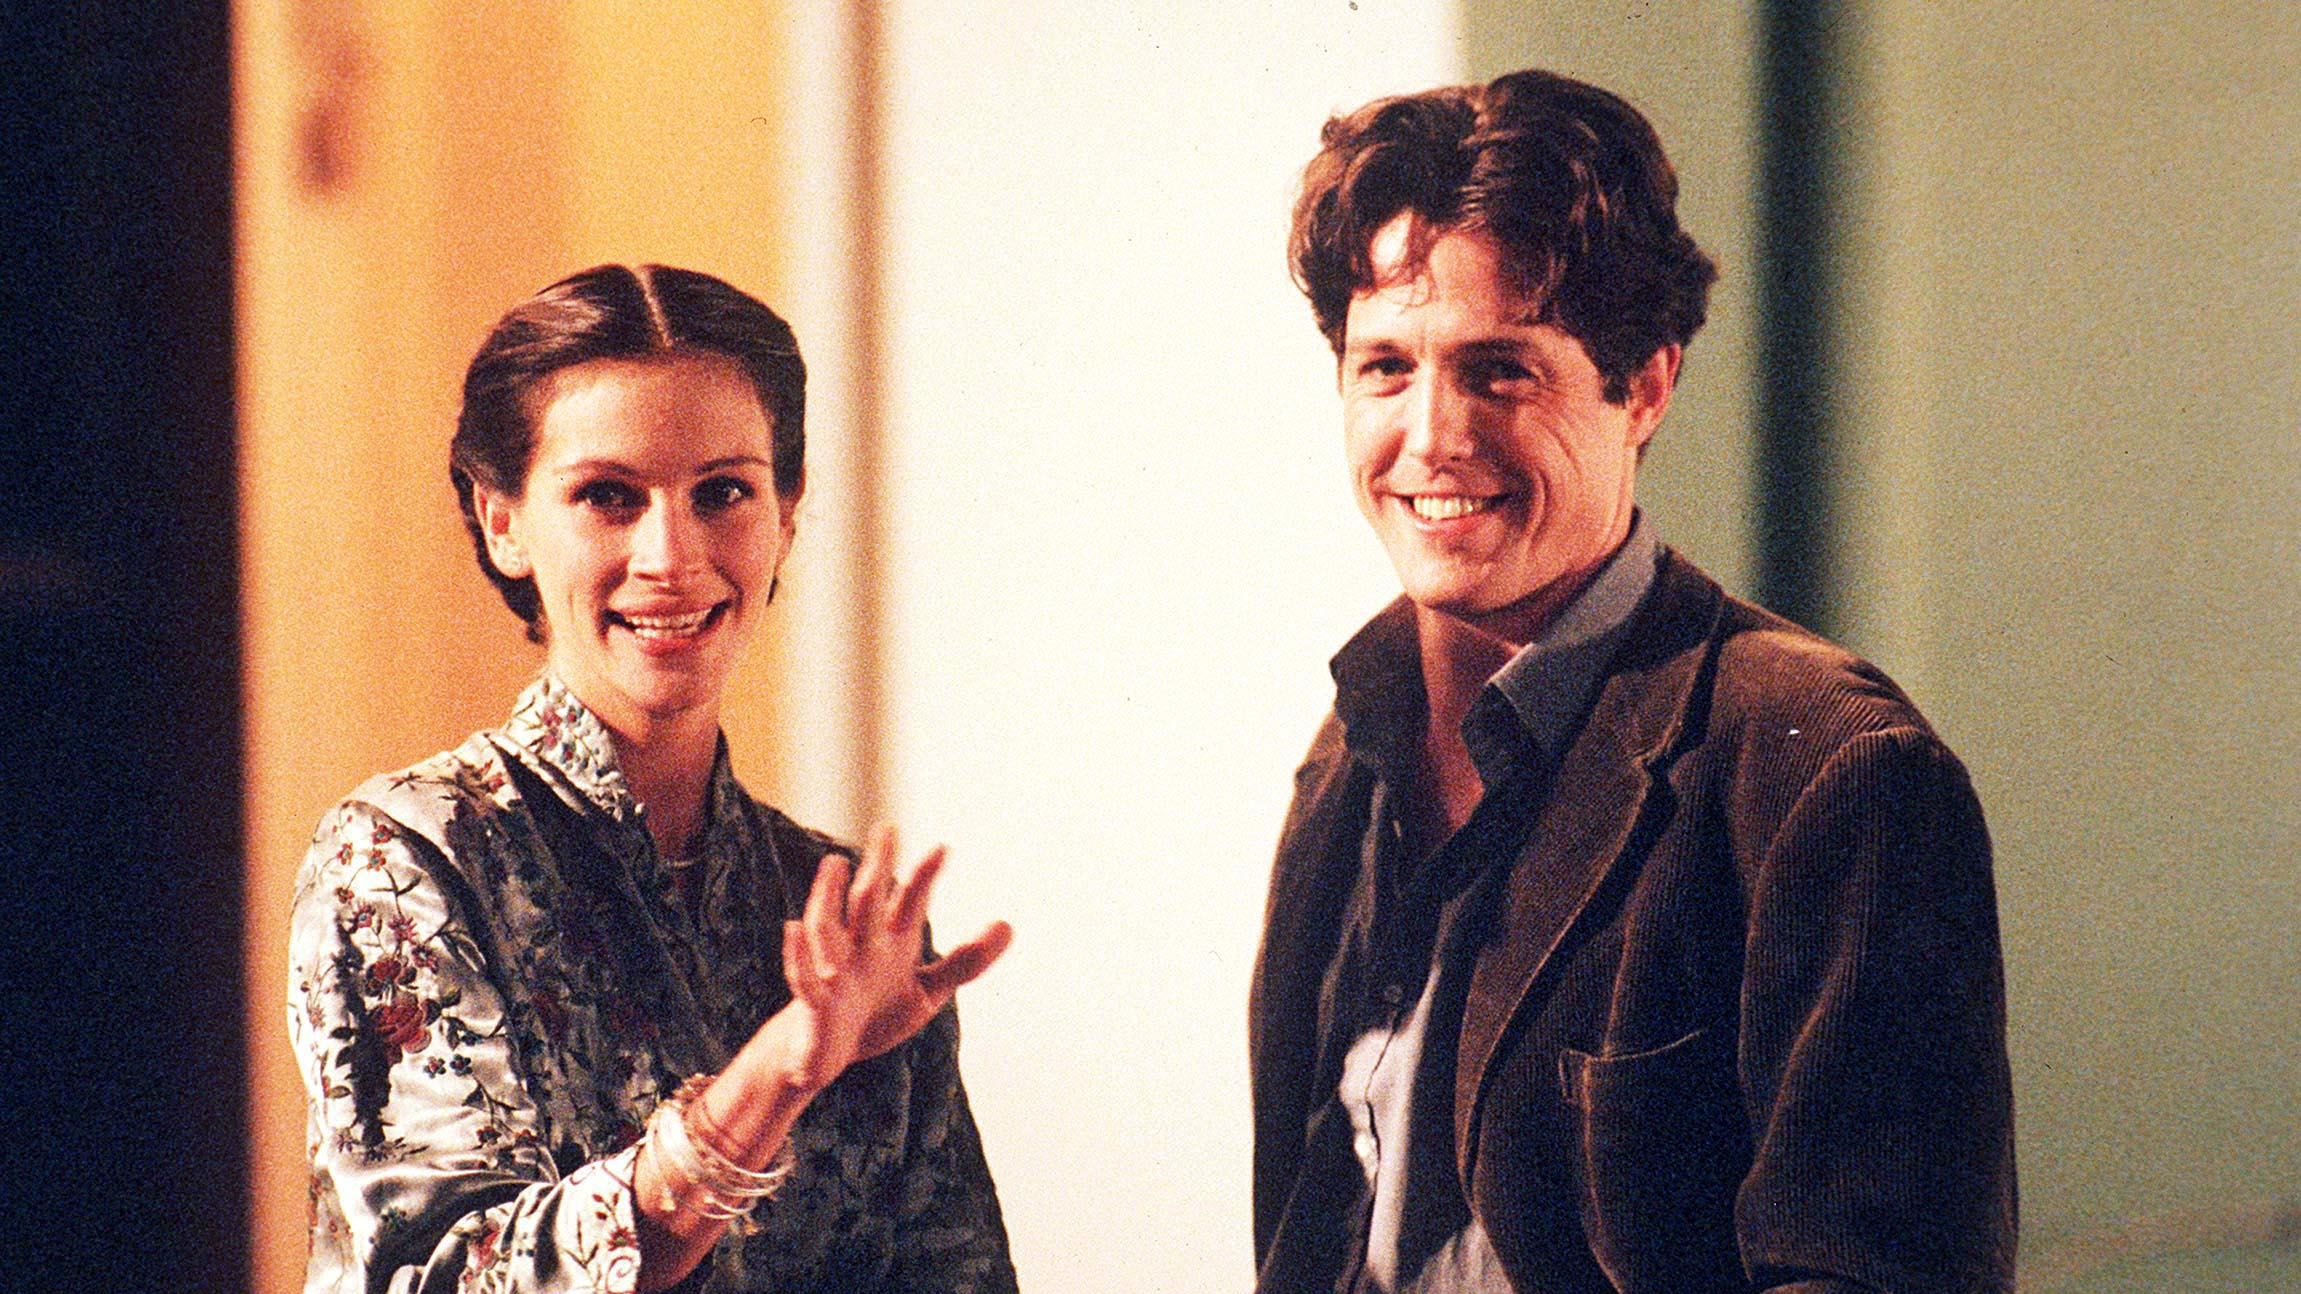 Notting Hill Movie Review